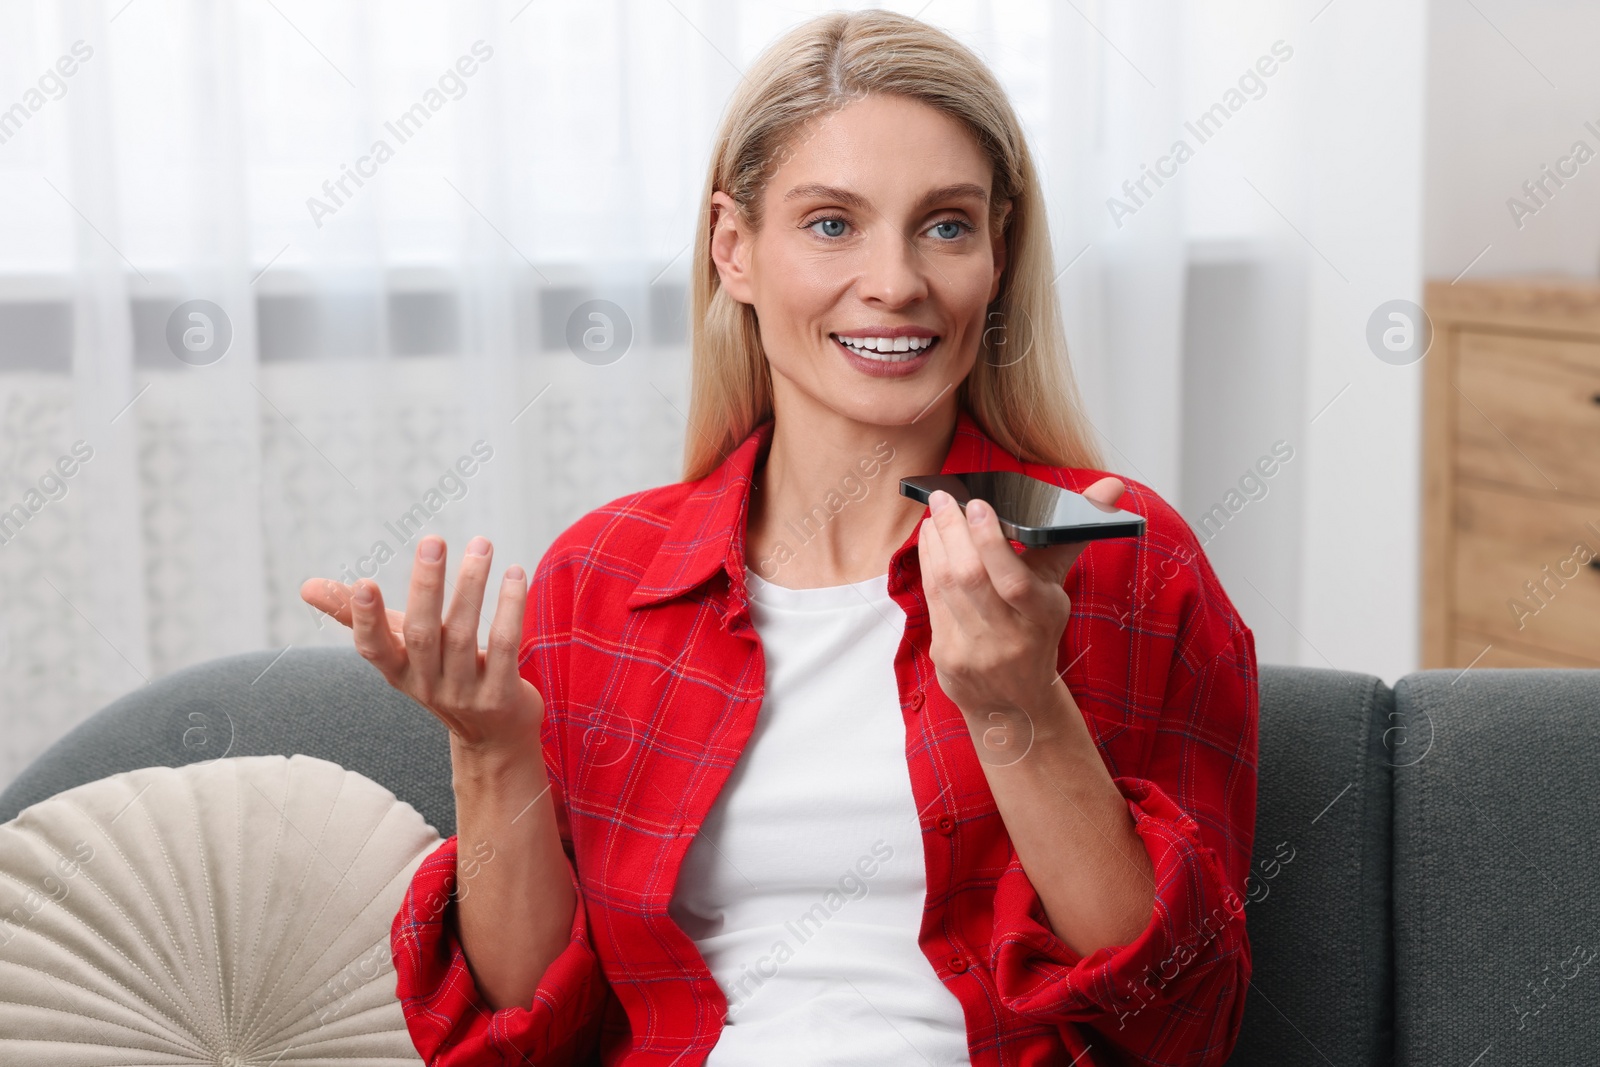 Photo of Woman recording voice message via smartphone on couch at home